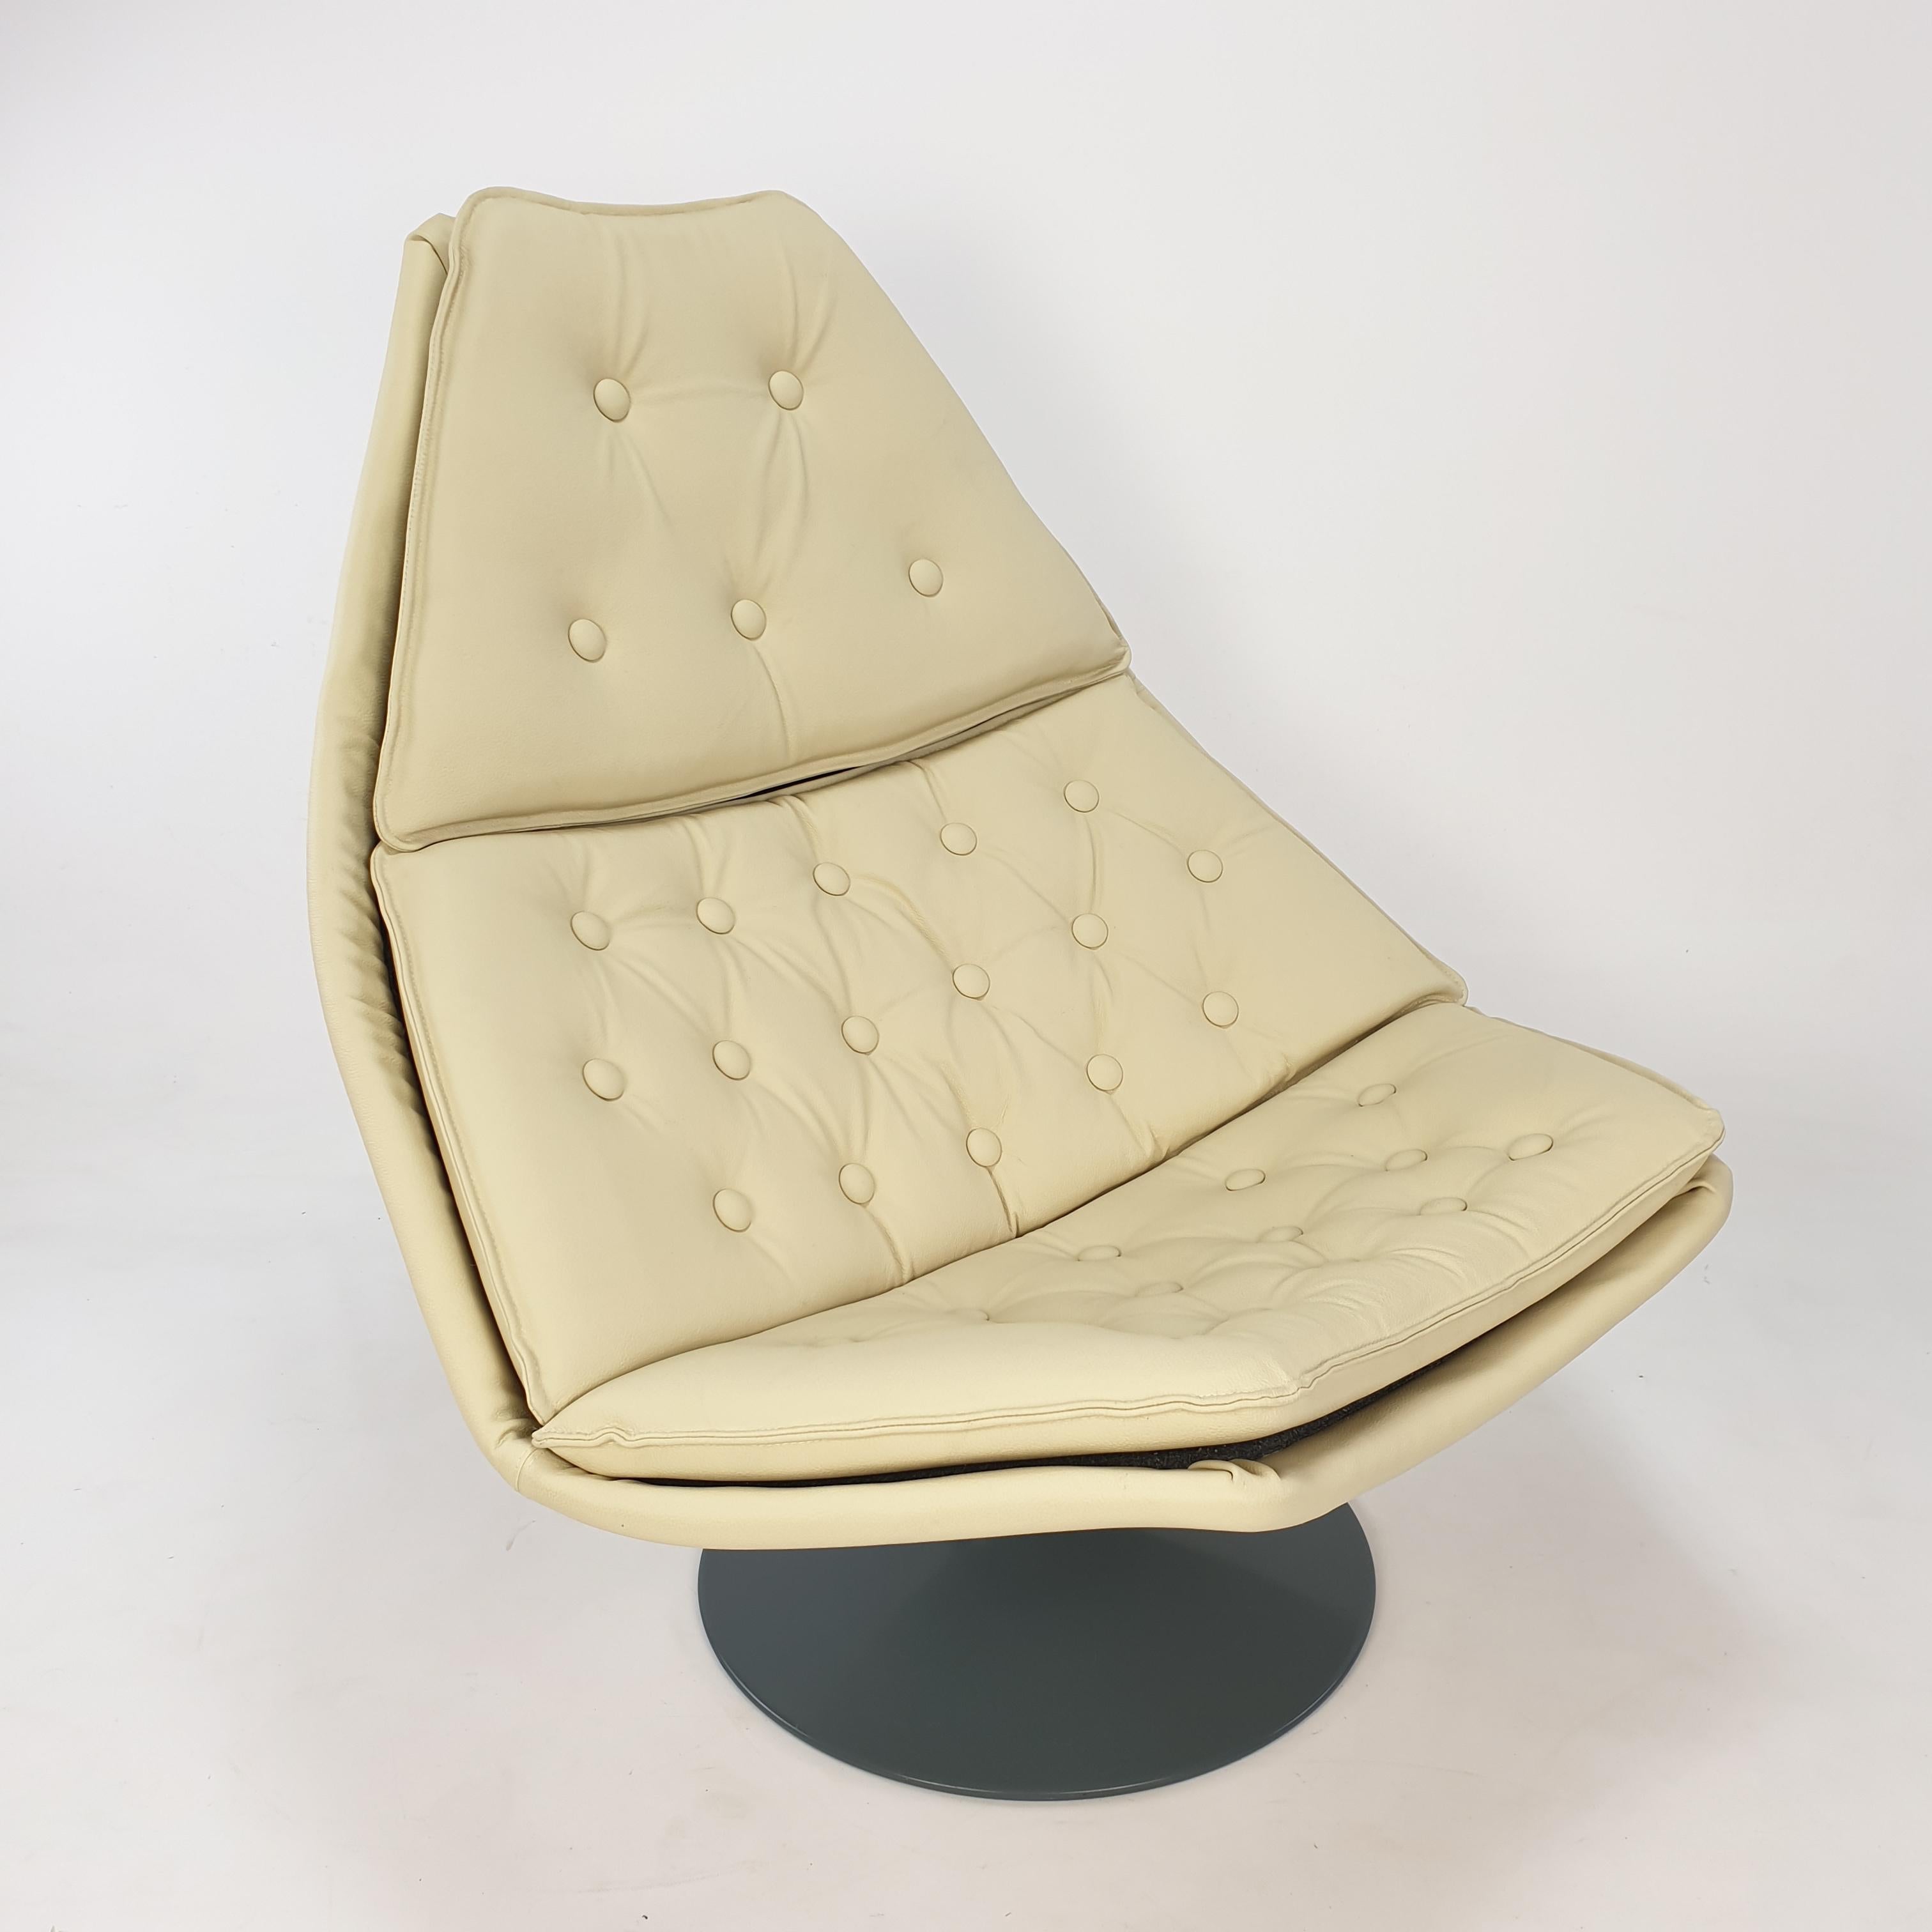 Very comfortable midcentury Artifort lounge chair, model F588 Designed by the famous English designer Geoffrey Harcourt in the 60's. Just reupholstered with high quality leather and new foam, so it is in perfect condition. It has a metal rotating